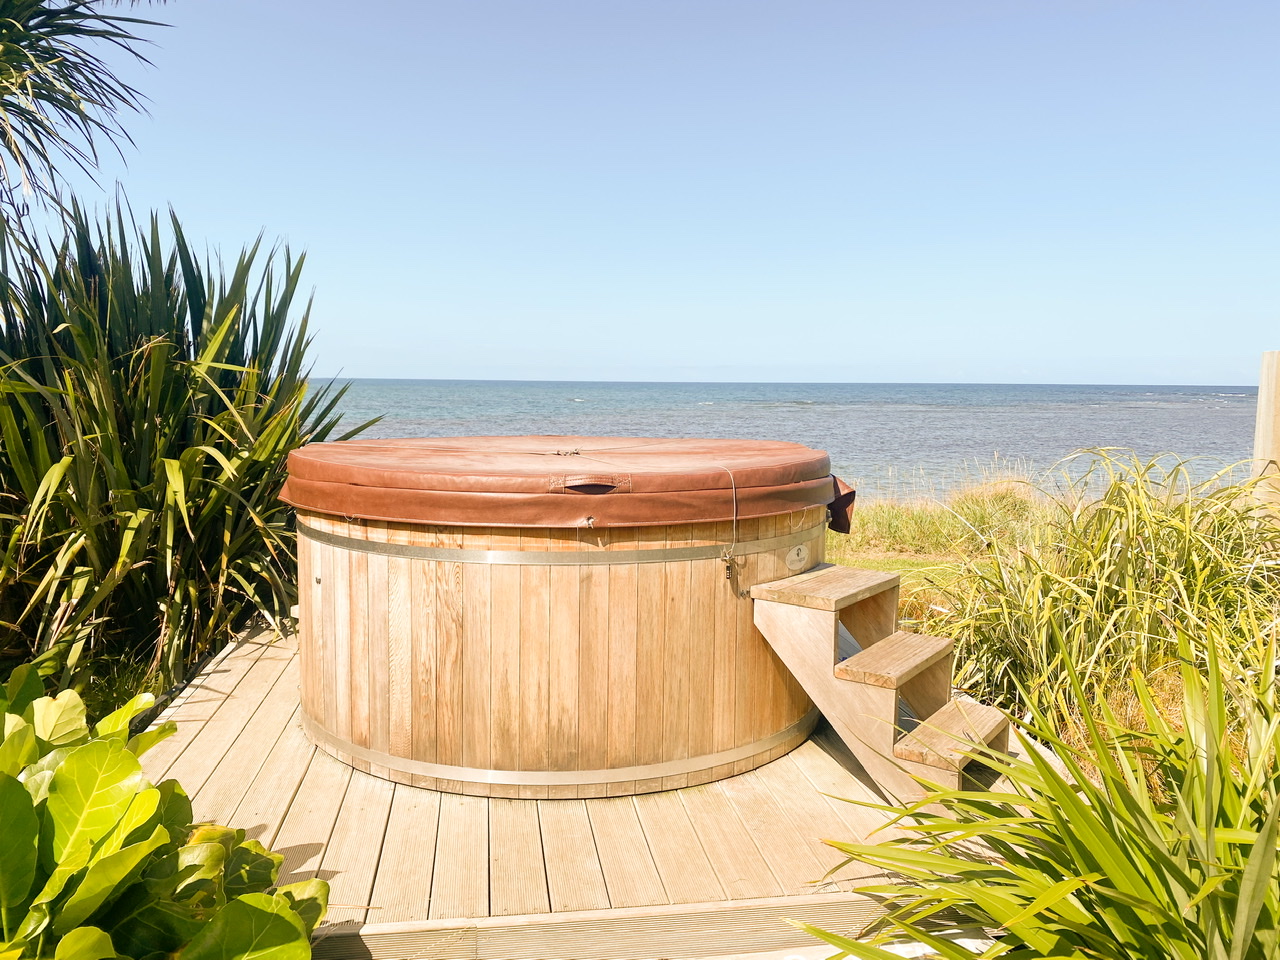 Hot tub with brown cover in front of ocean